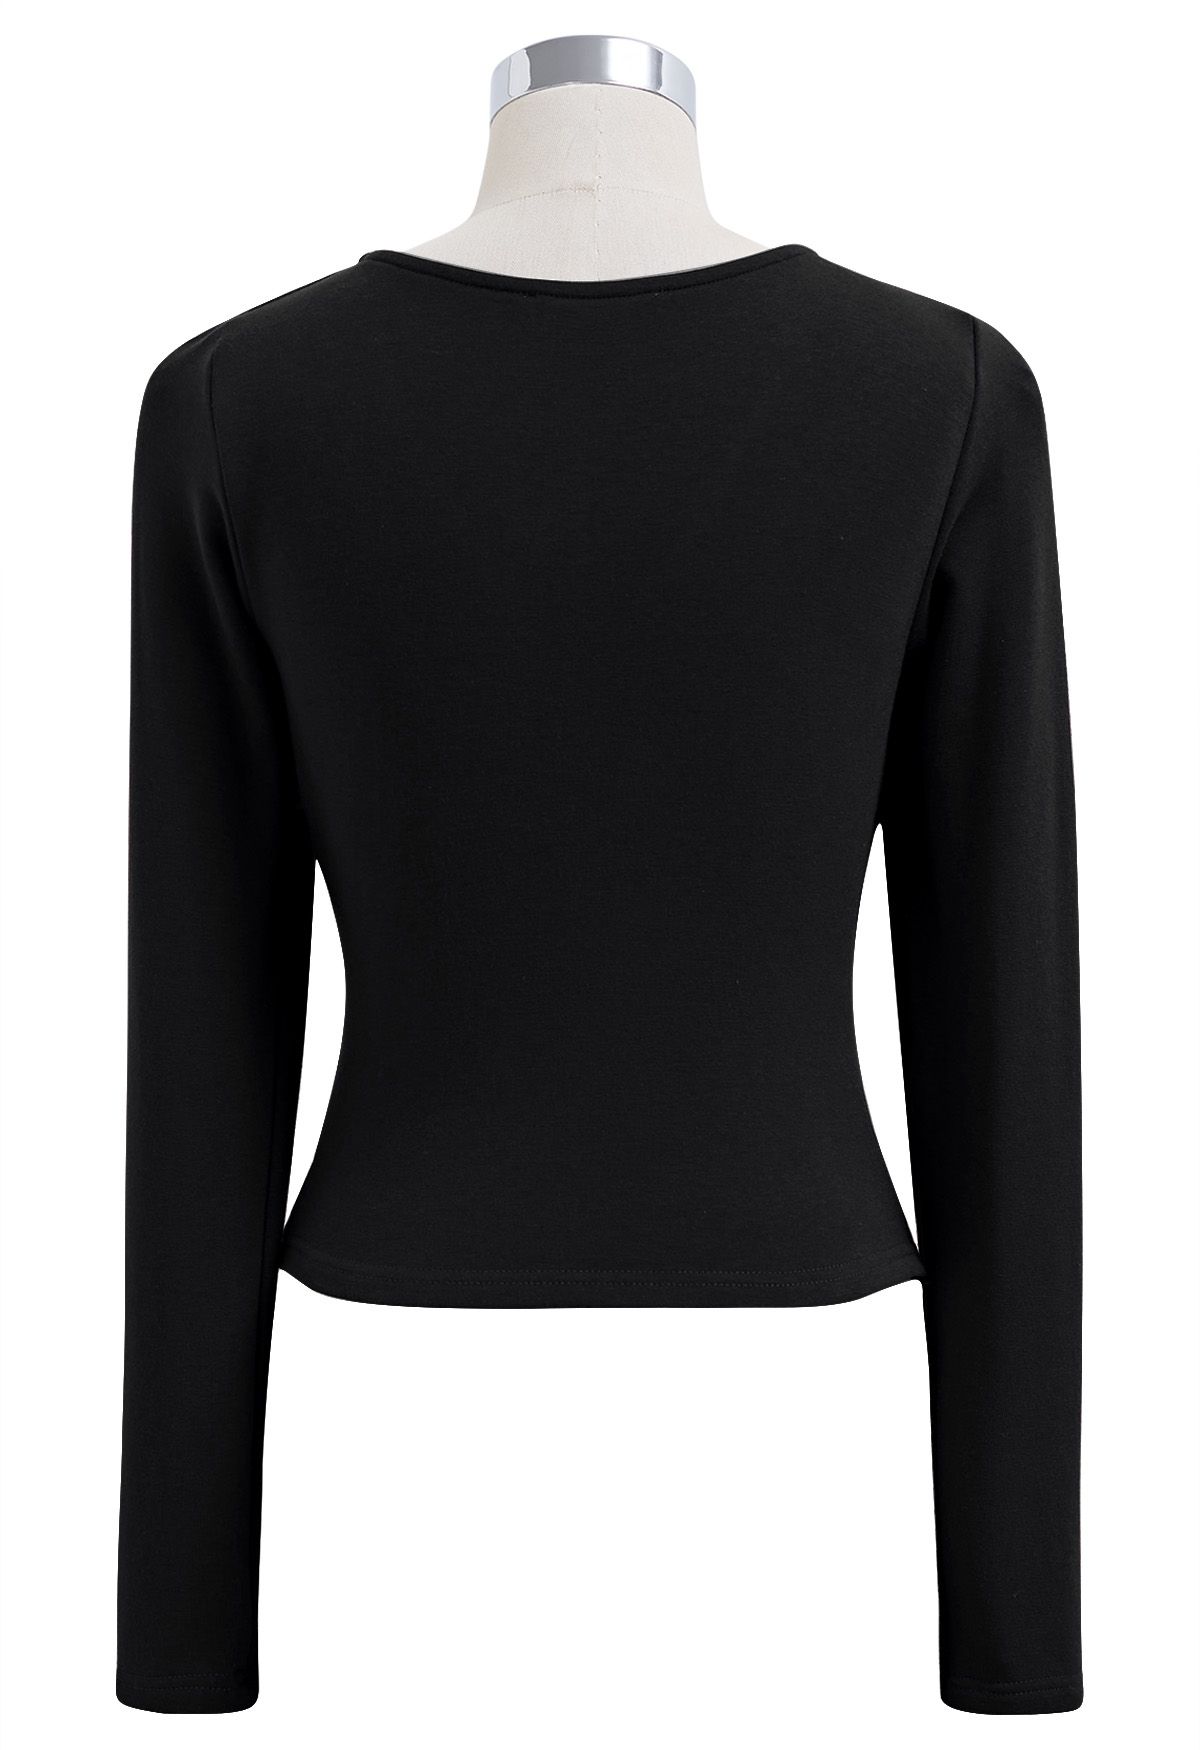 Cross V-Neck Long Sleeves Top in Black - Retro, Indie and Unique Fashion